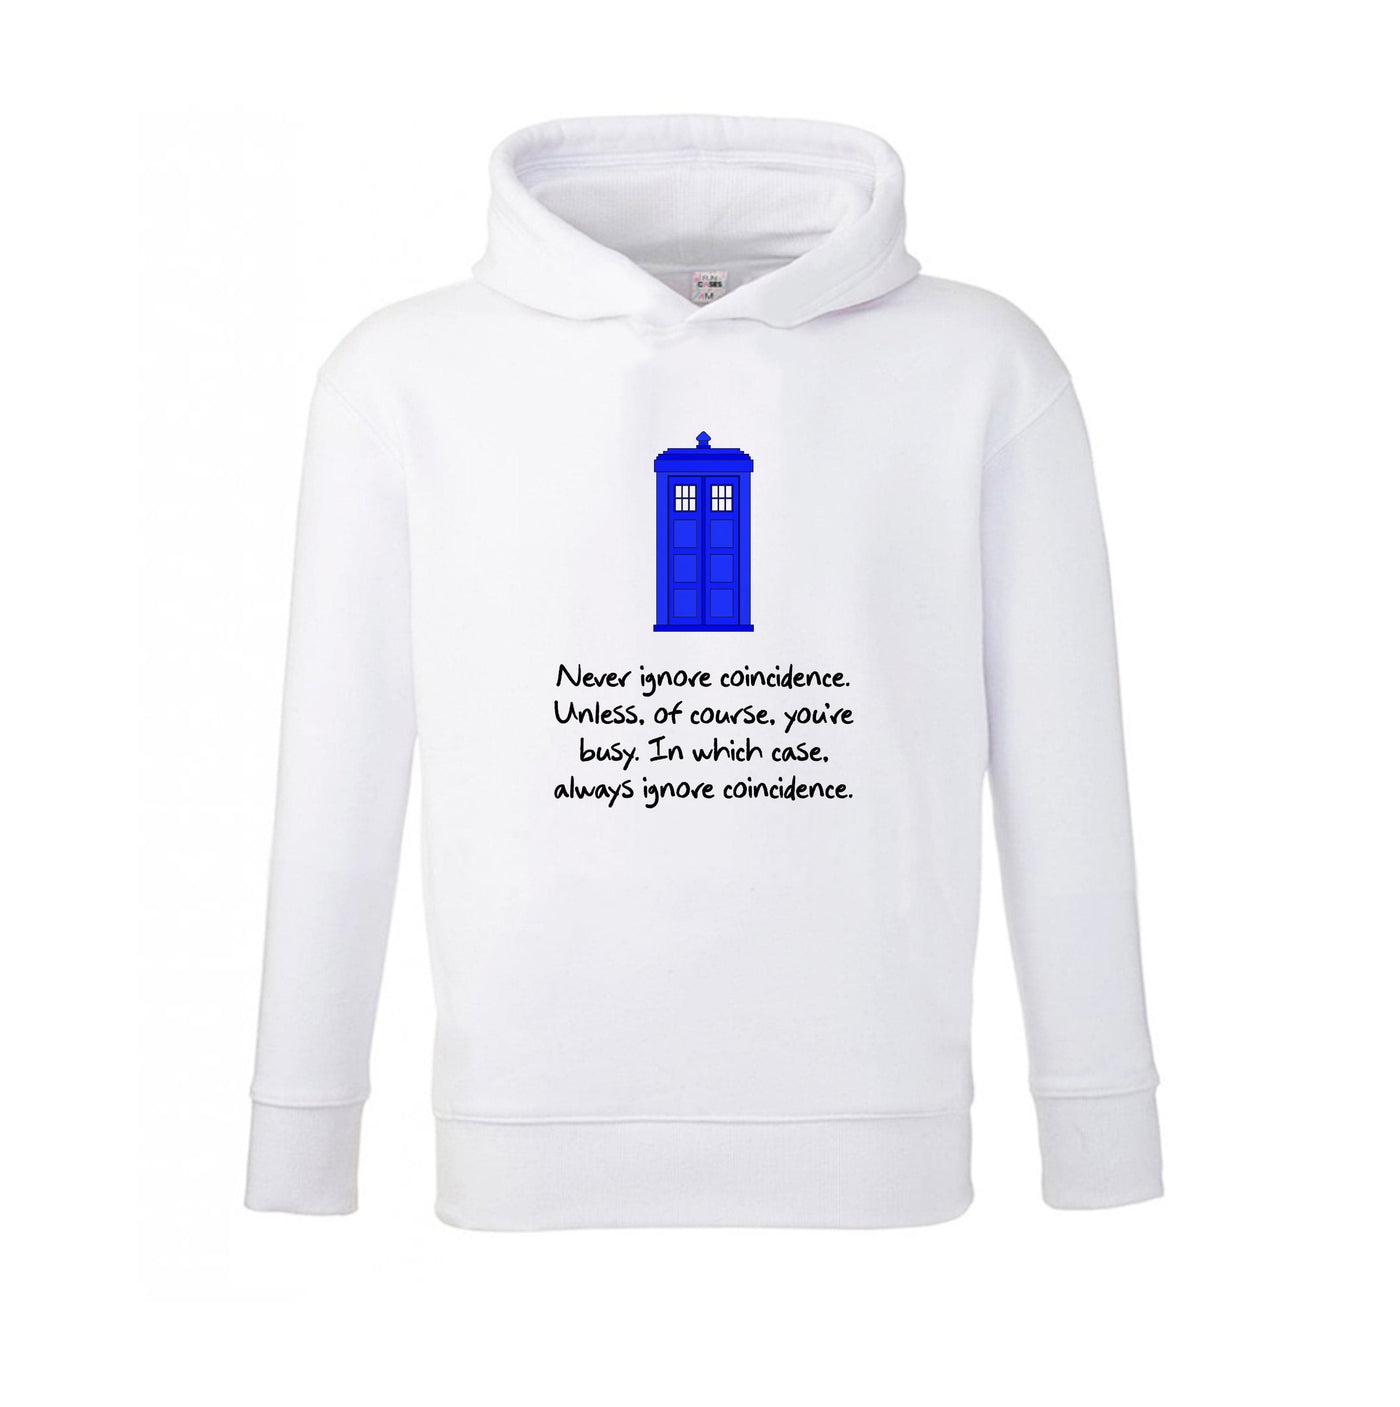 Never Ignore Coincidence - Doctor Who Kids Hoodie